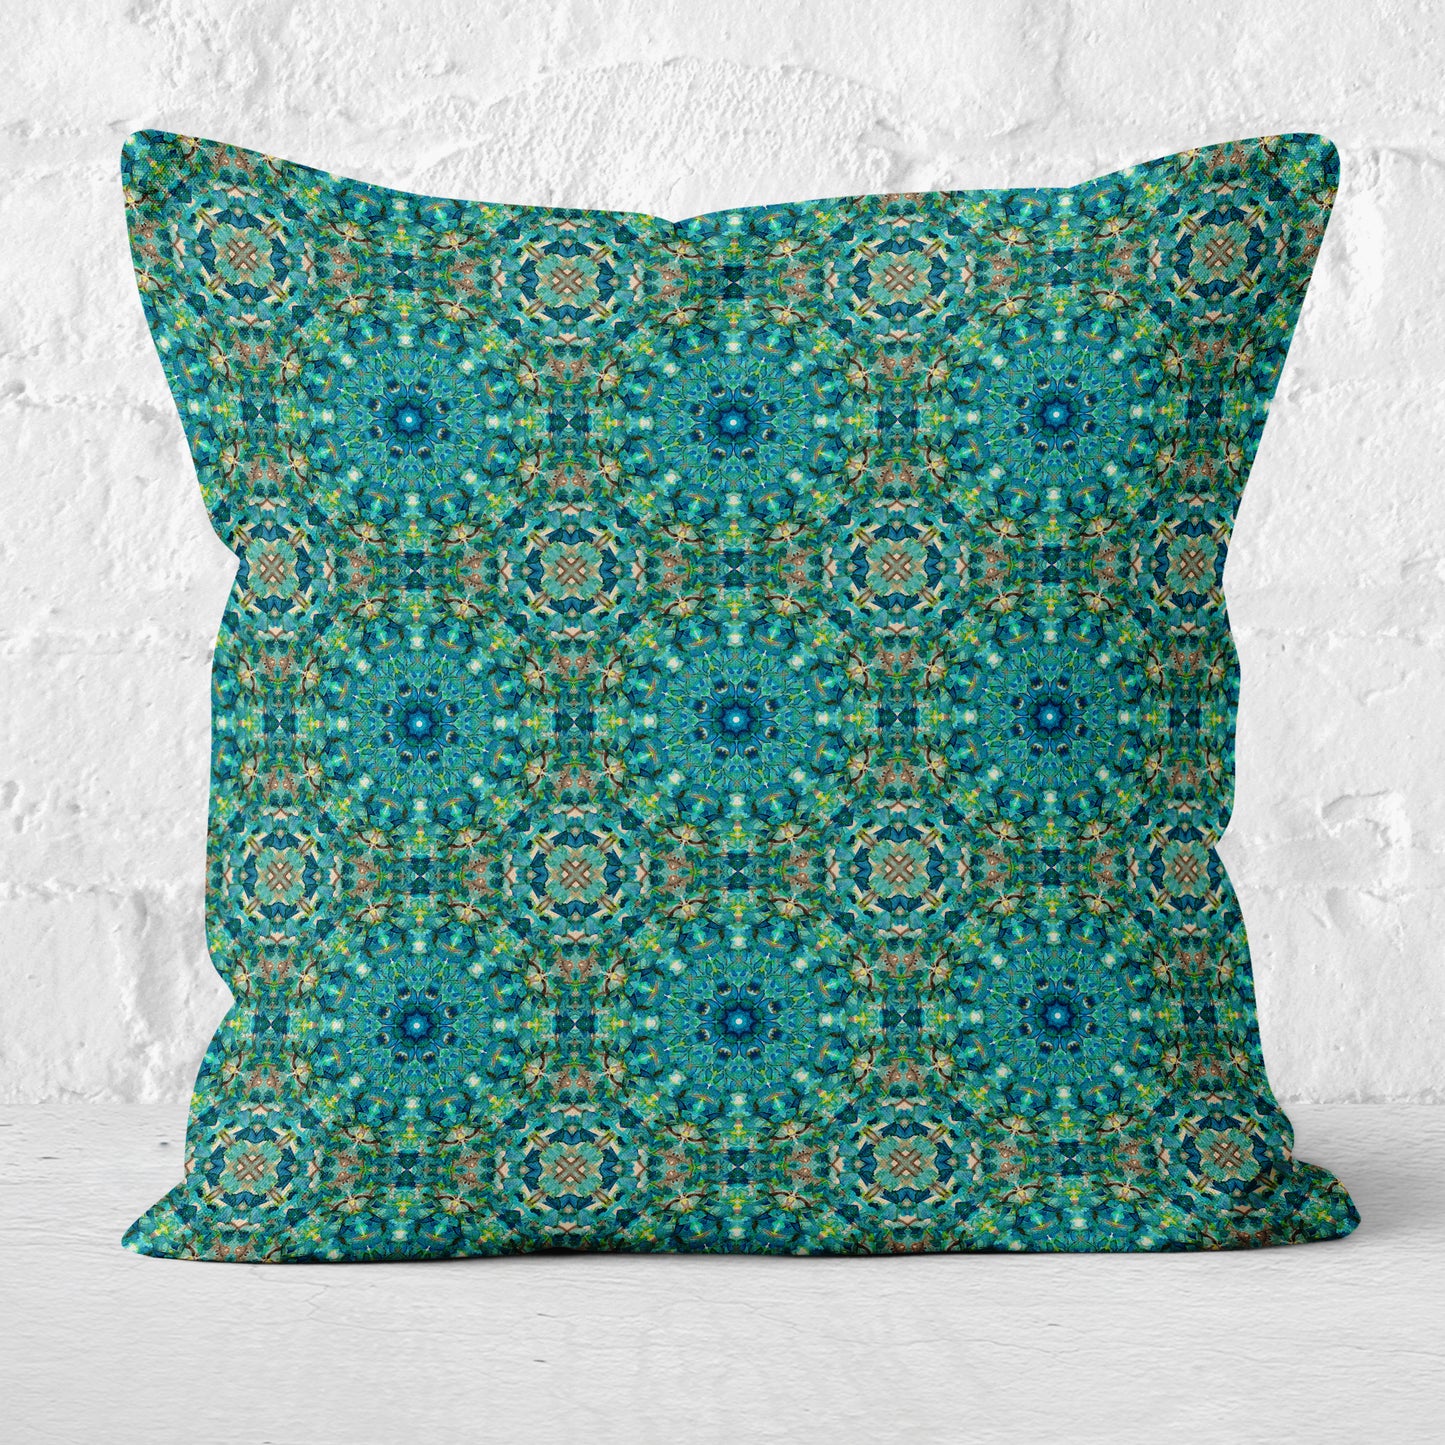 Pillow featuring an abstract teal watercolor pattern on white brick background